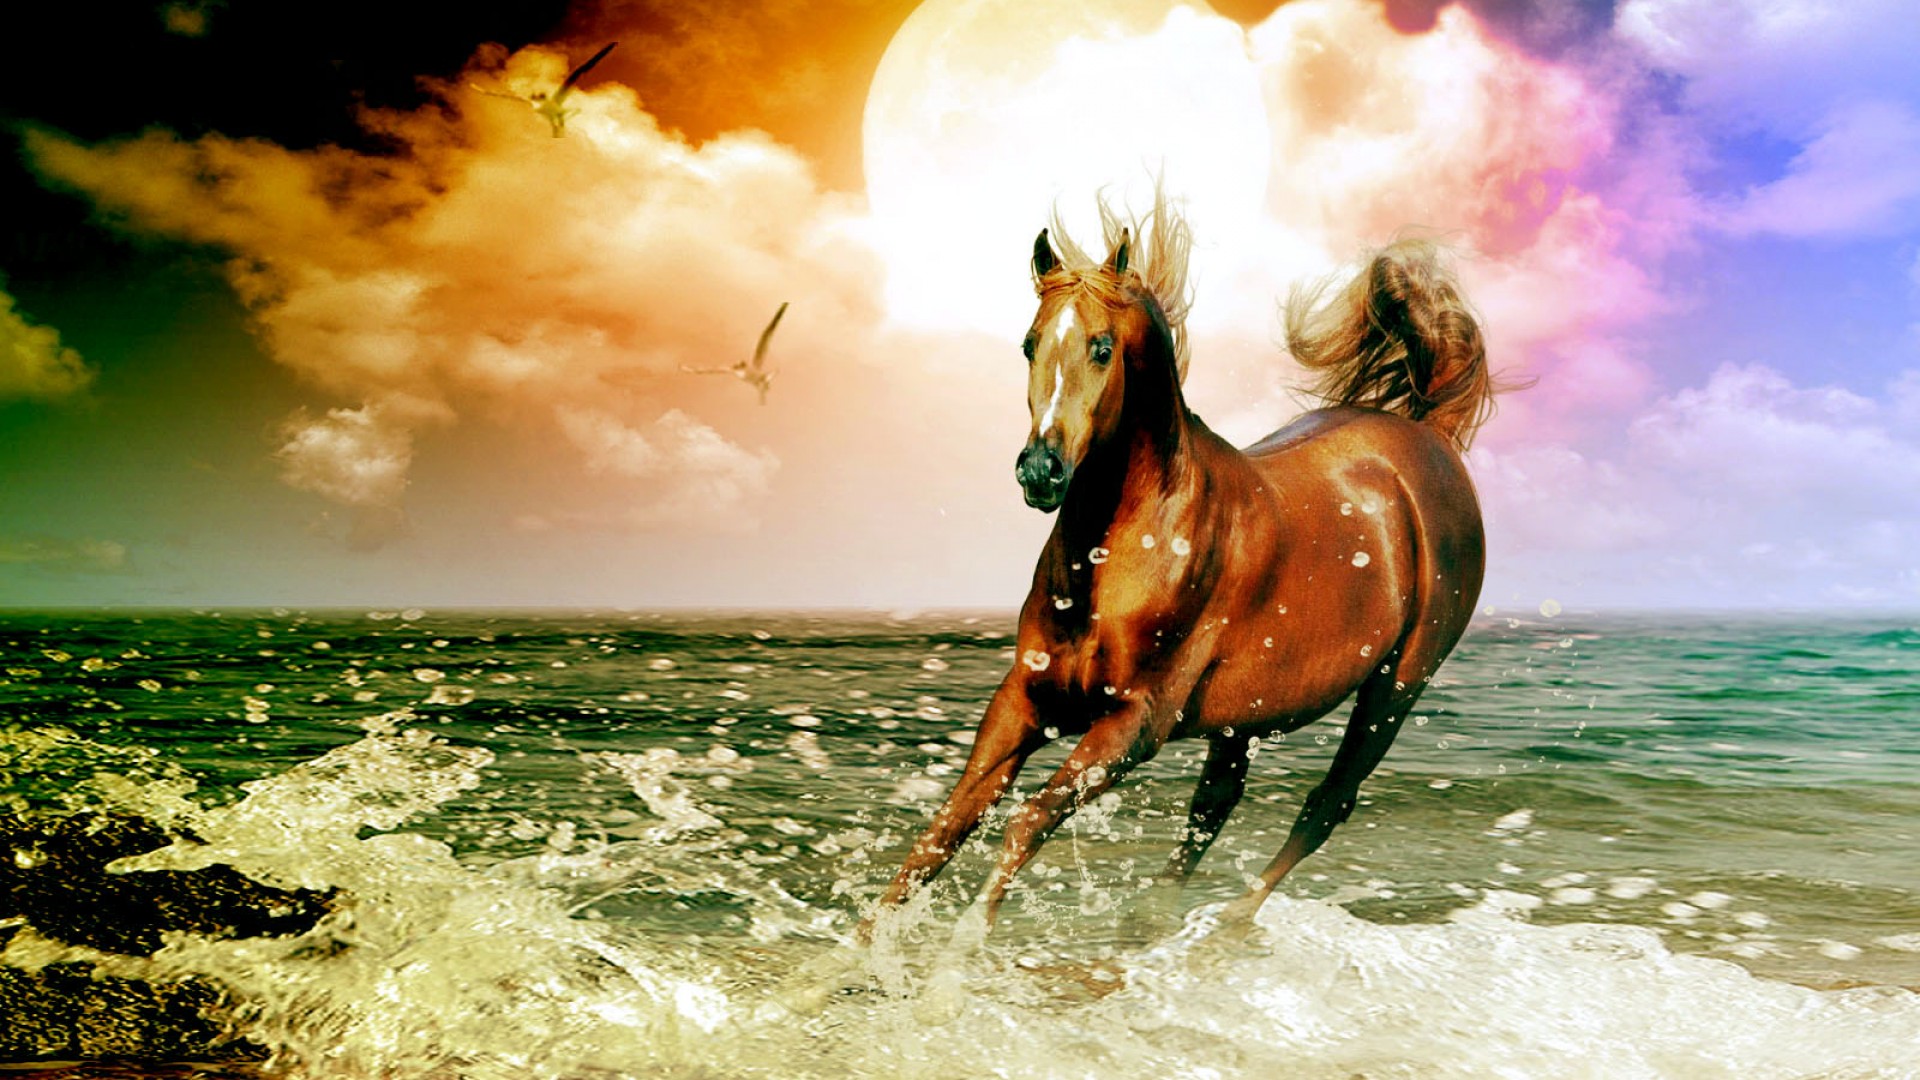 Horse Beach Desktop Wallpaper And Make This For Your